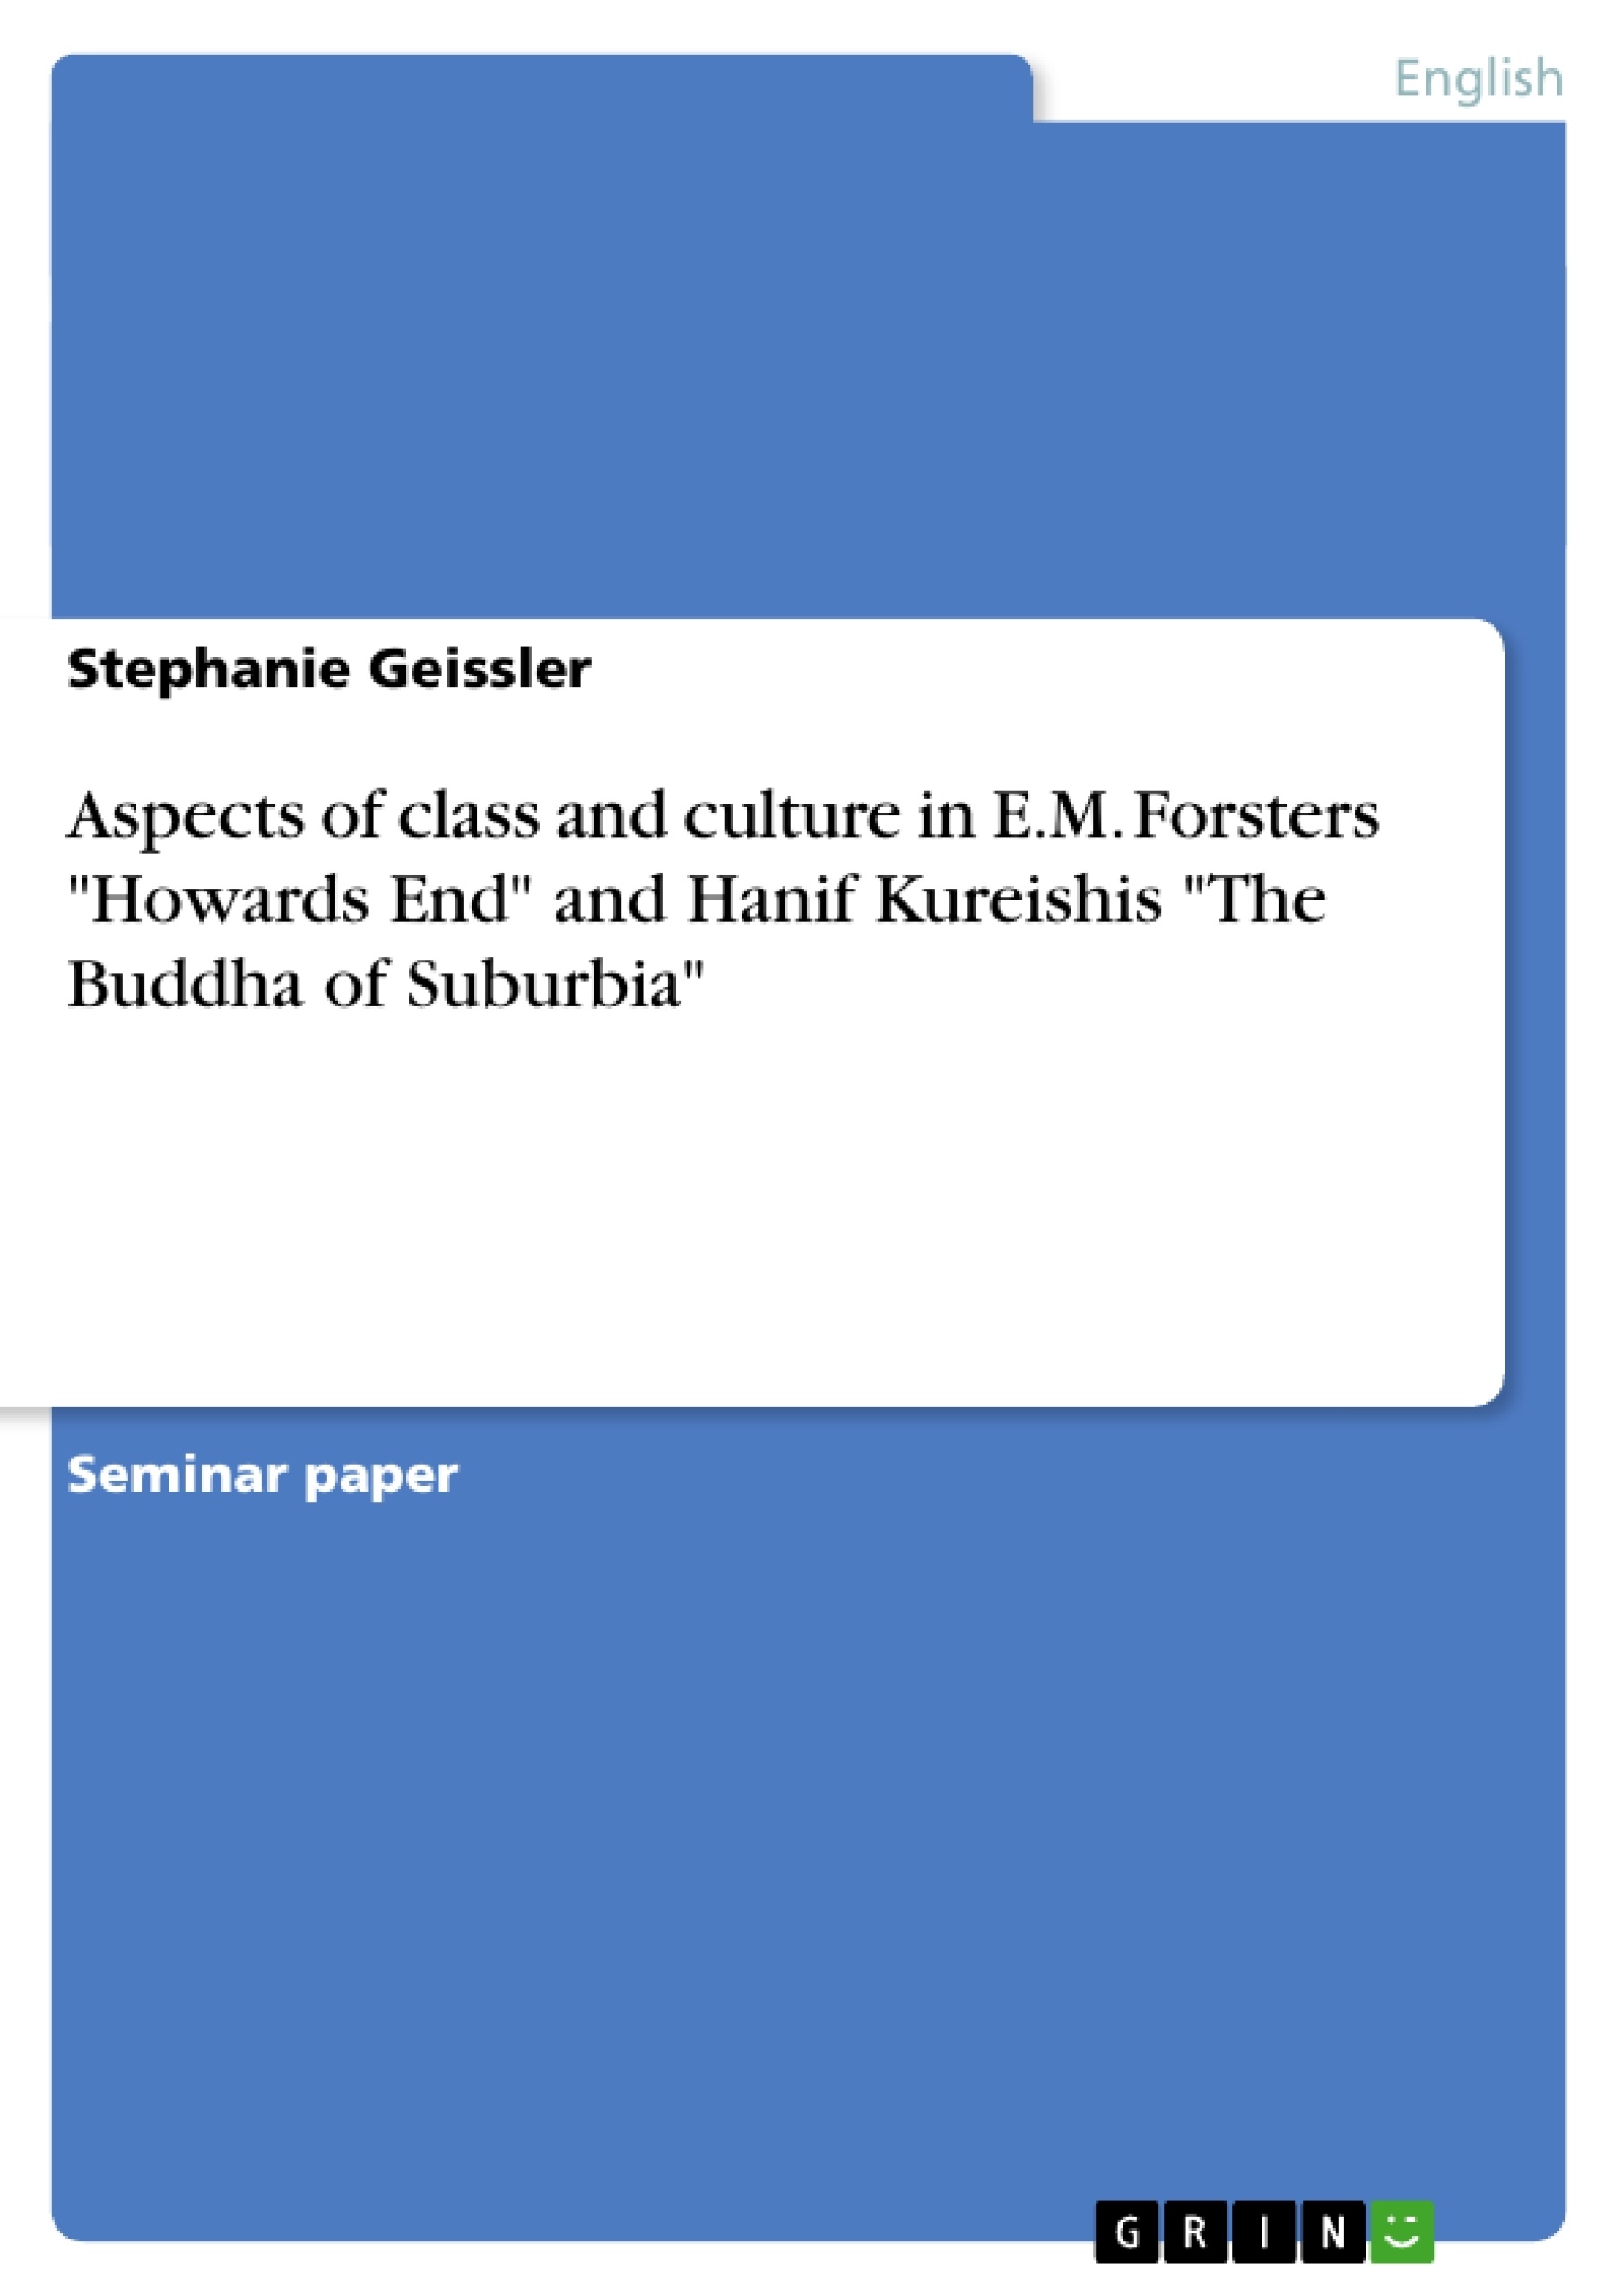 Titre: Aspects of class and culture in E.M. Forsters "Howards End" and Hanif Kureishis "The Buddha of Suburbia"